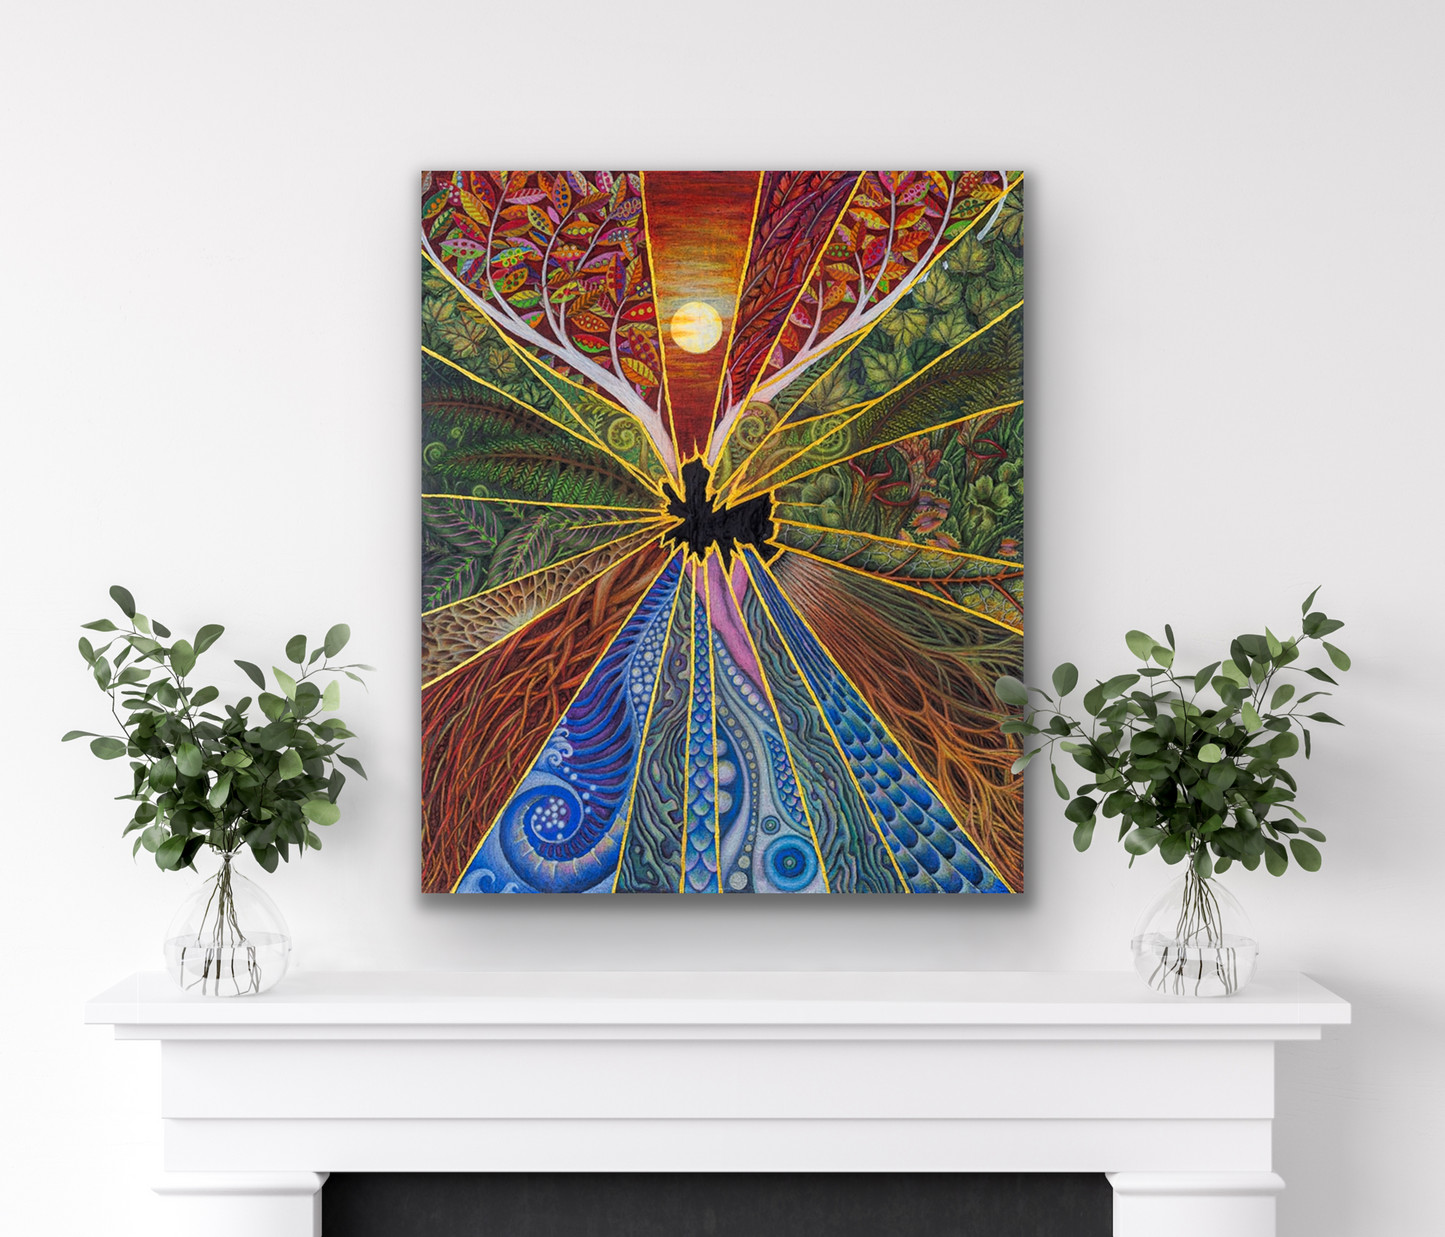 "Resurrection" artwork is bright and vibrant.  It will add a blast of colour to any room you place it.